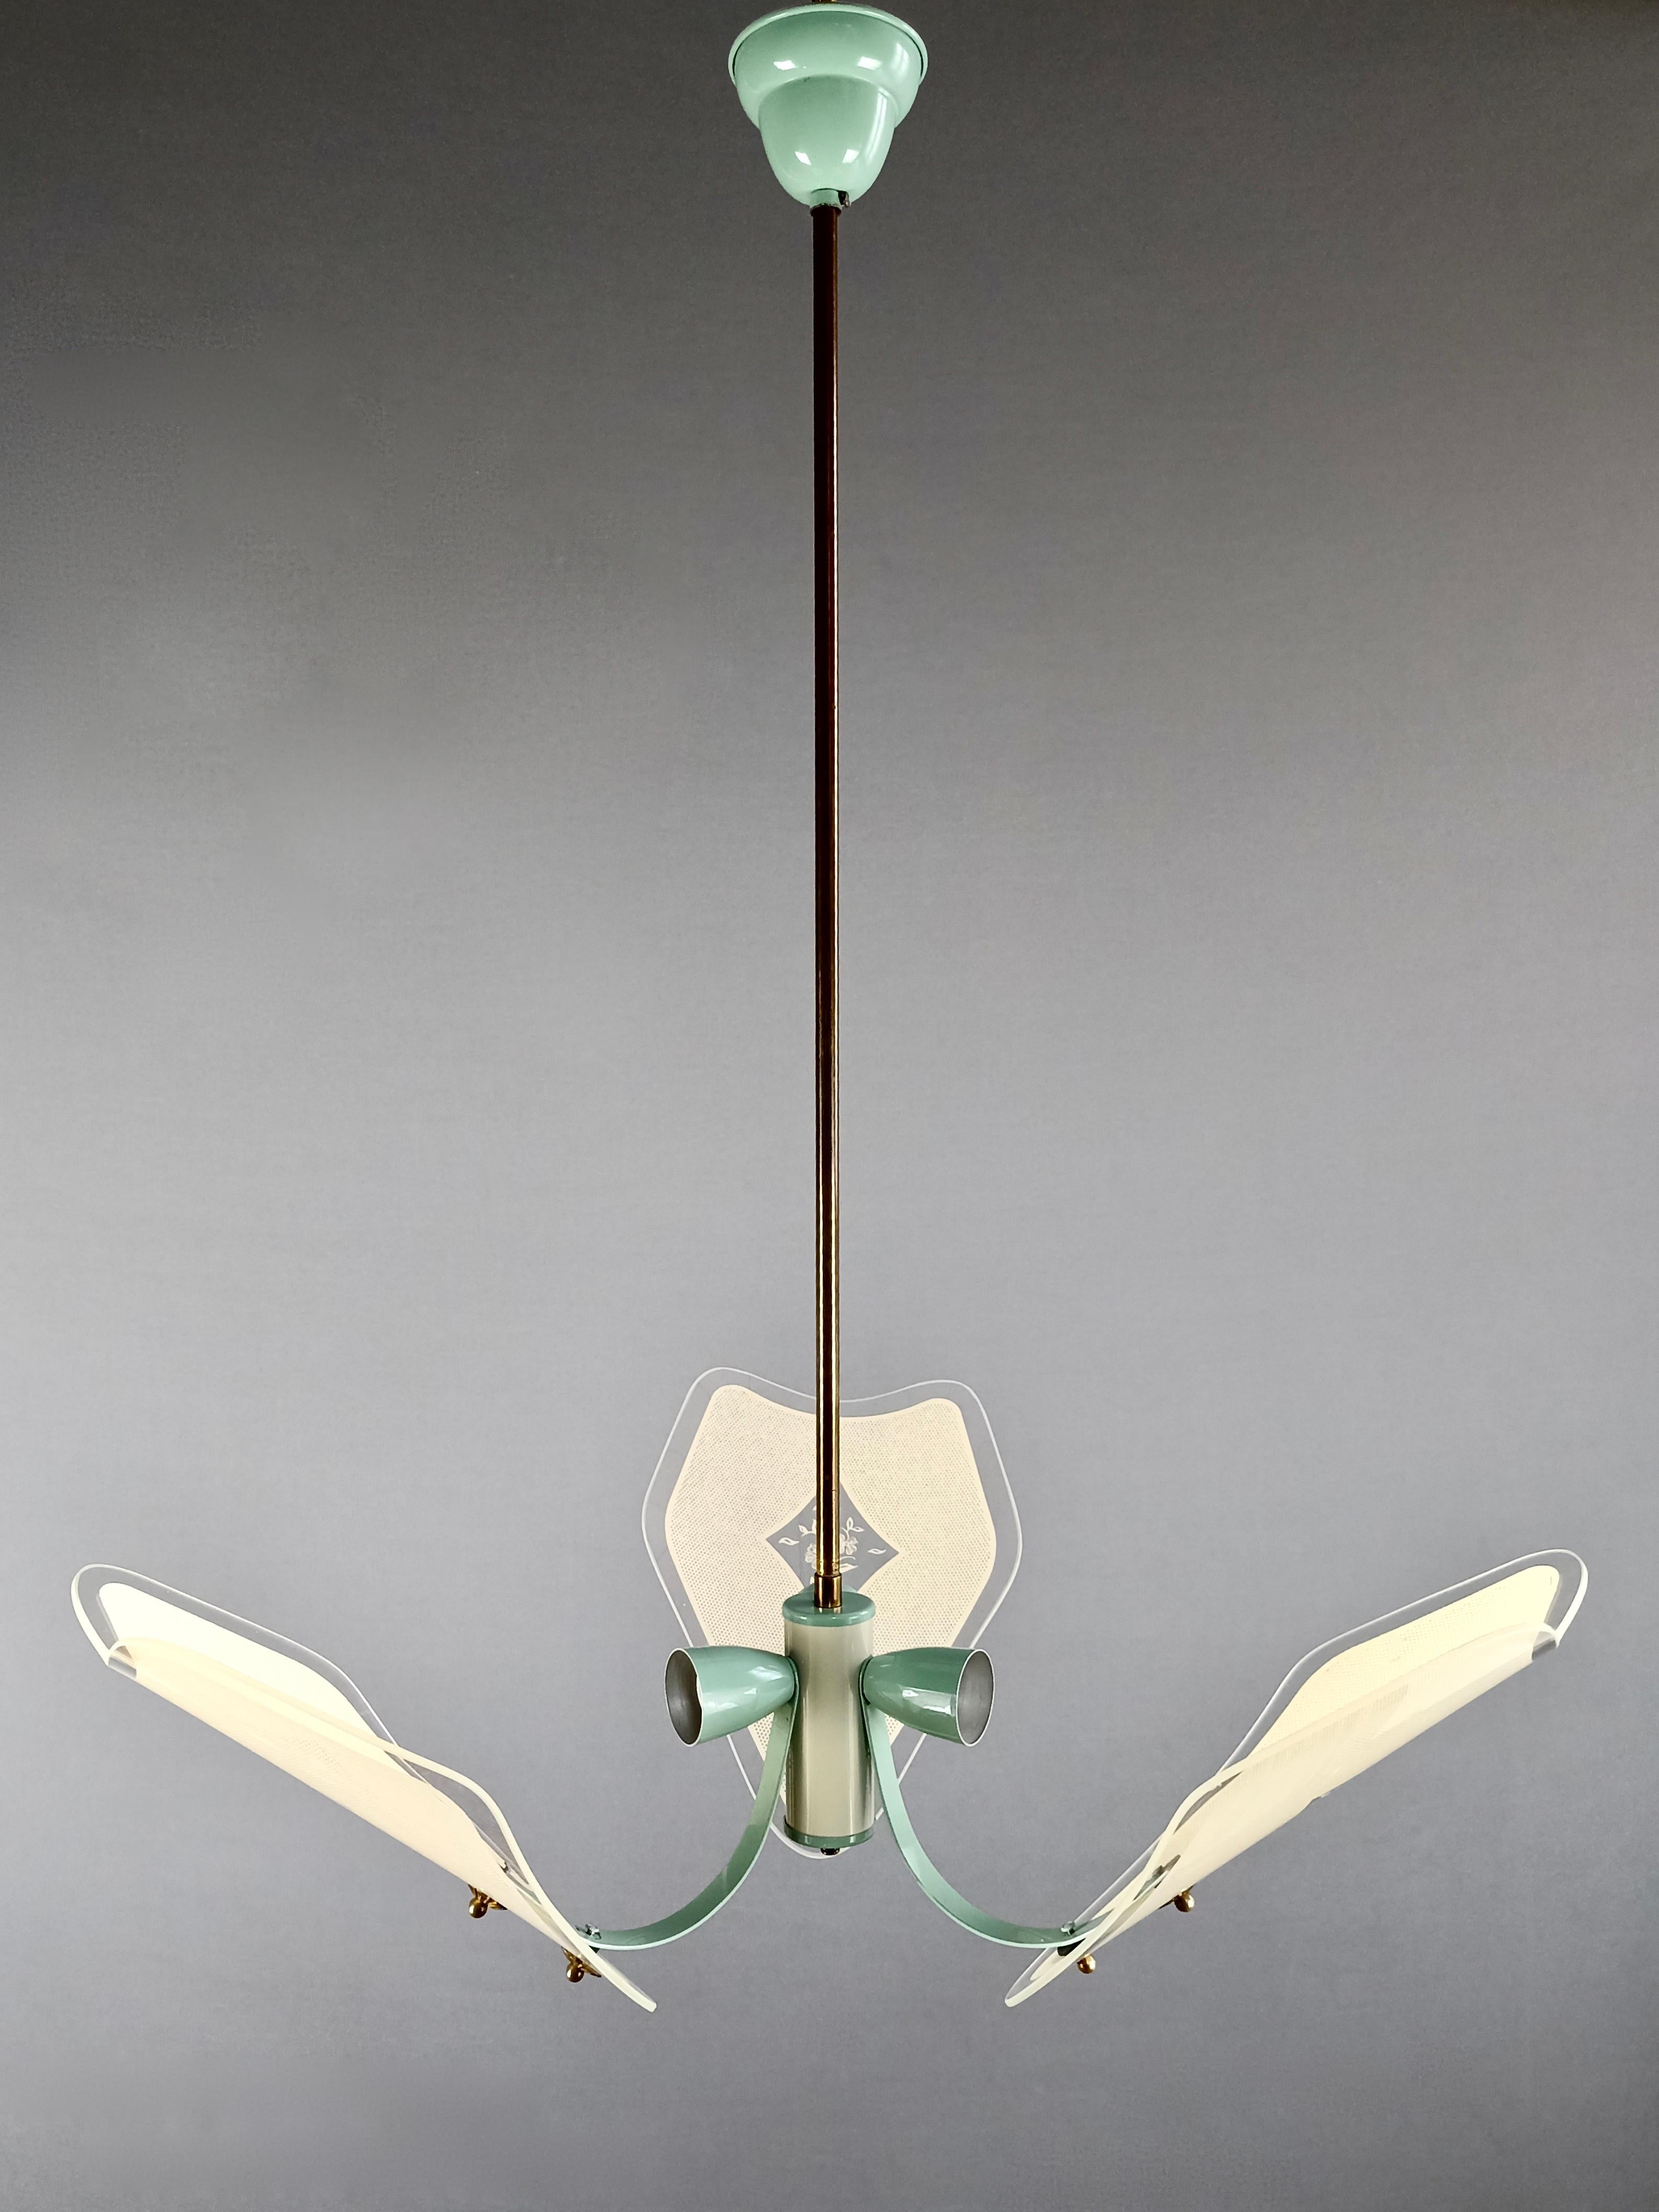 Mid-20th Century Italian 1950s Three-Light Lacquered Metal and Decorated Glass Shades Chandelier For Sale